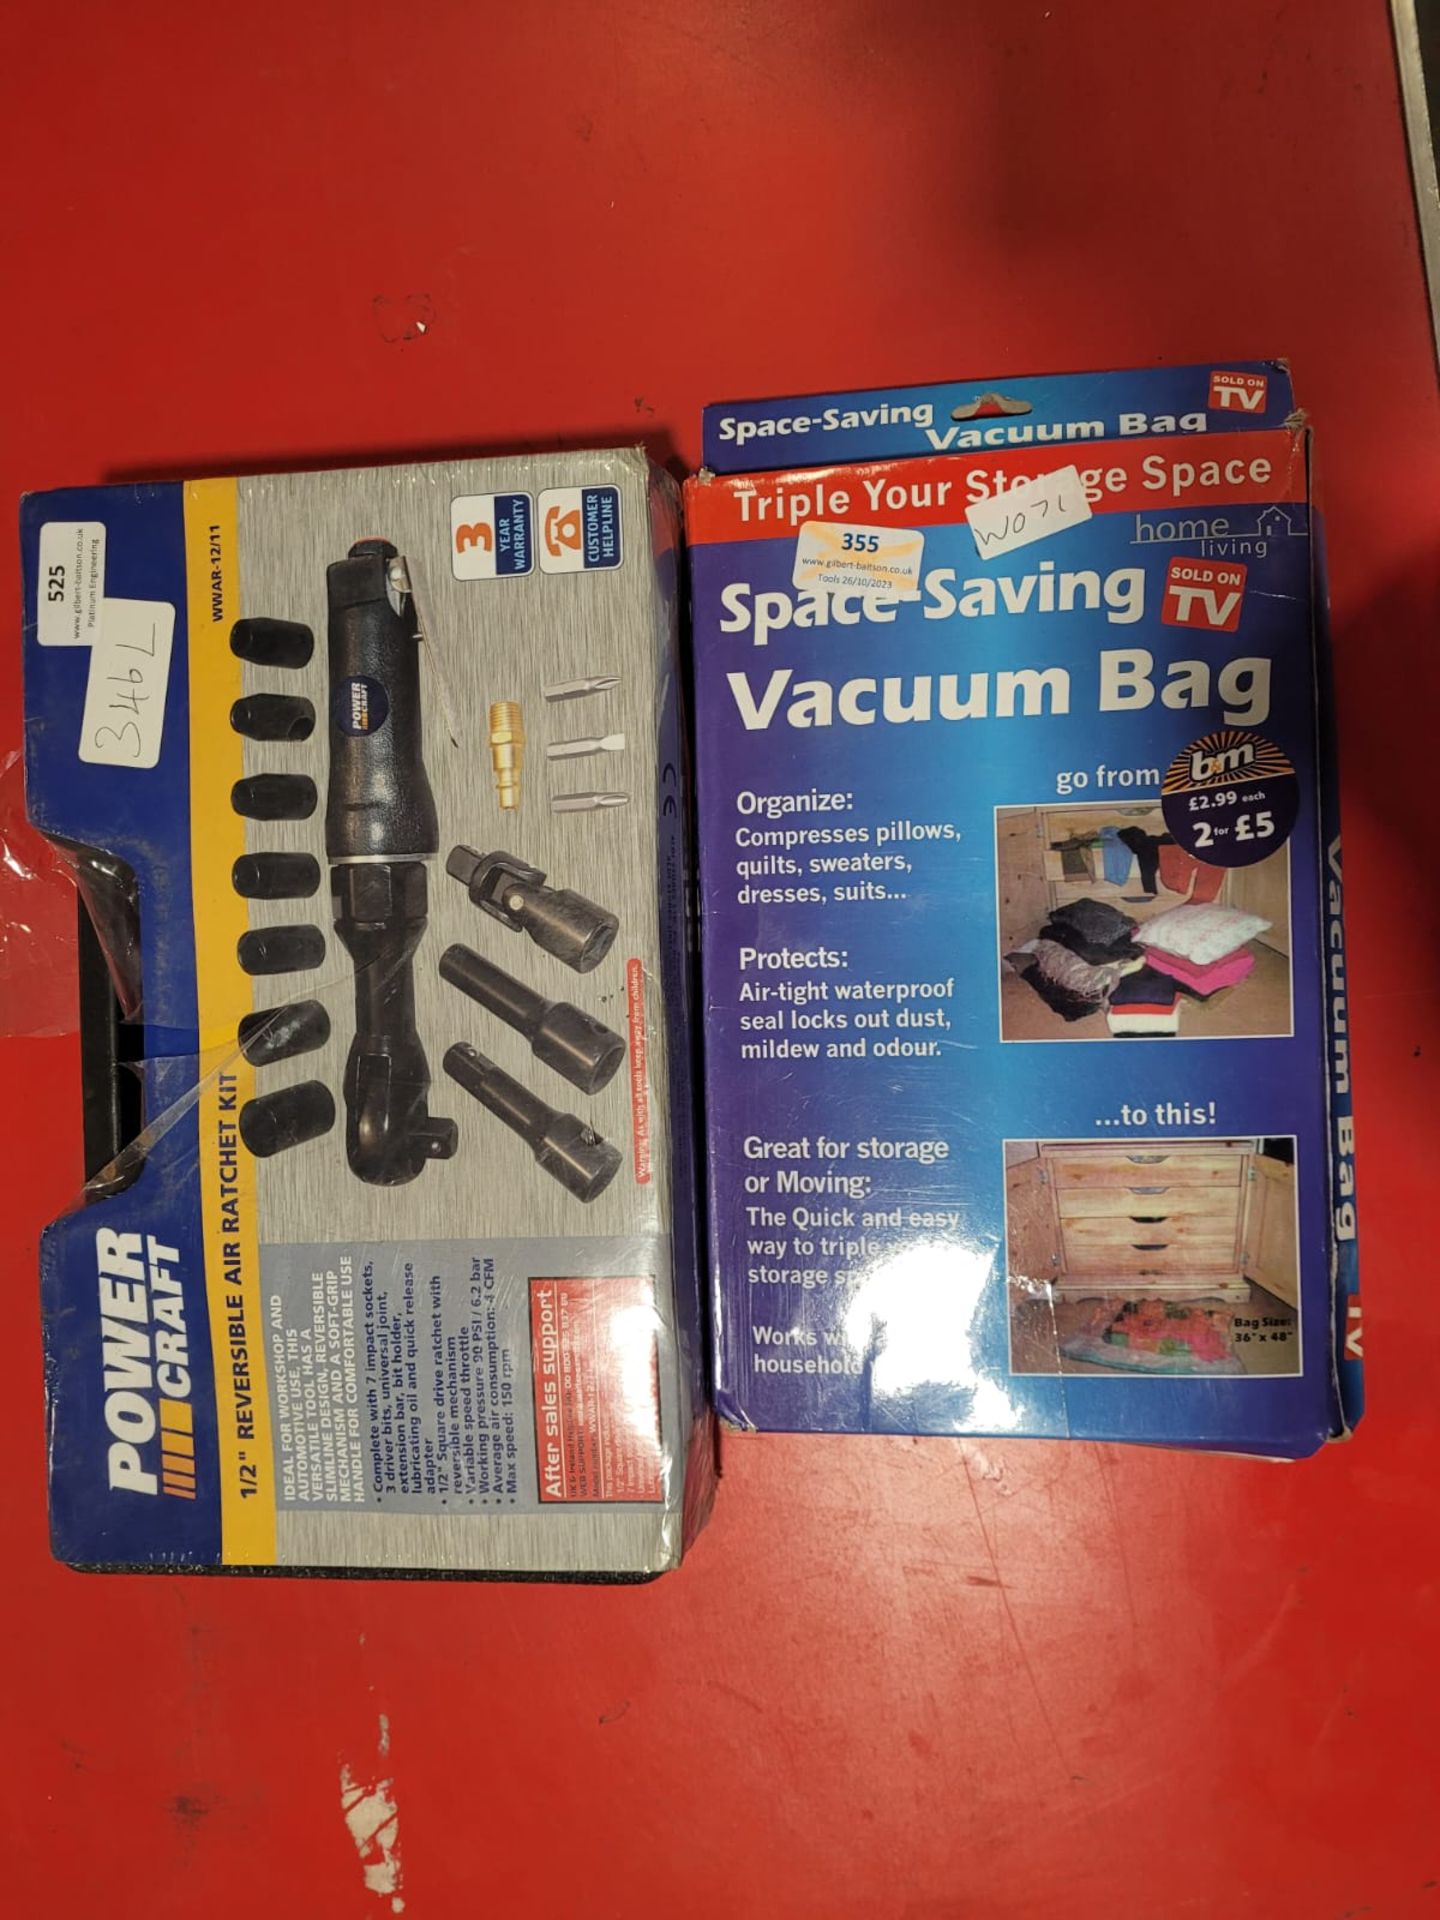 Power Craft ½” Reversible Air Ratchet Kit and a Space Saver Vacuum Bag